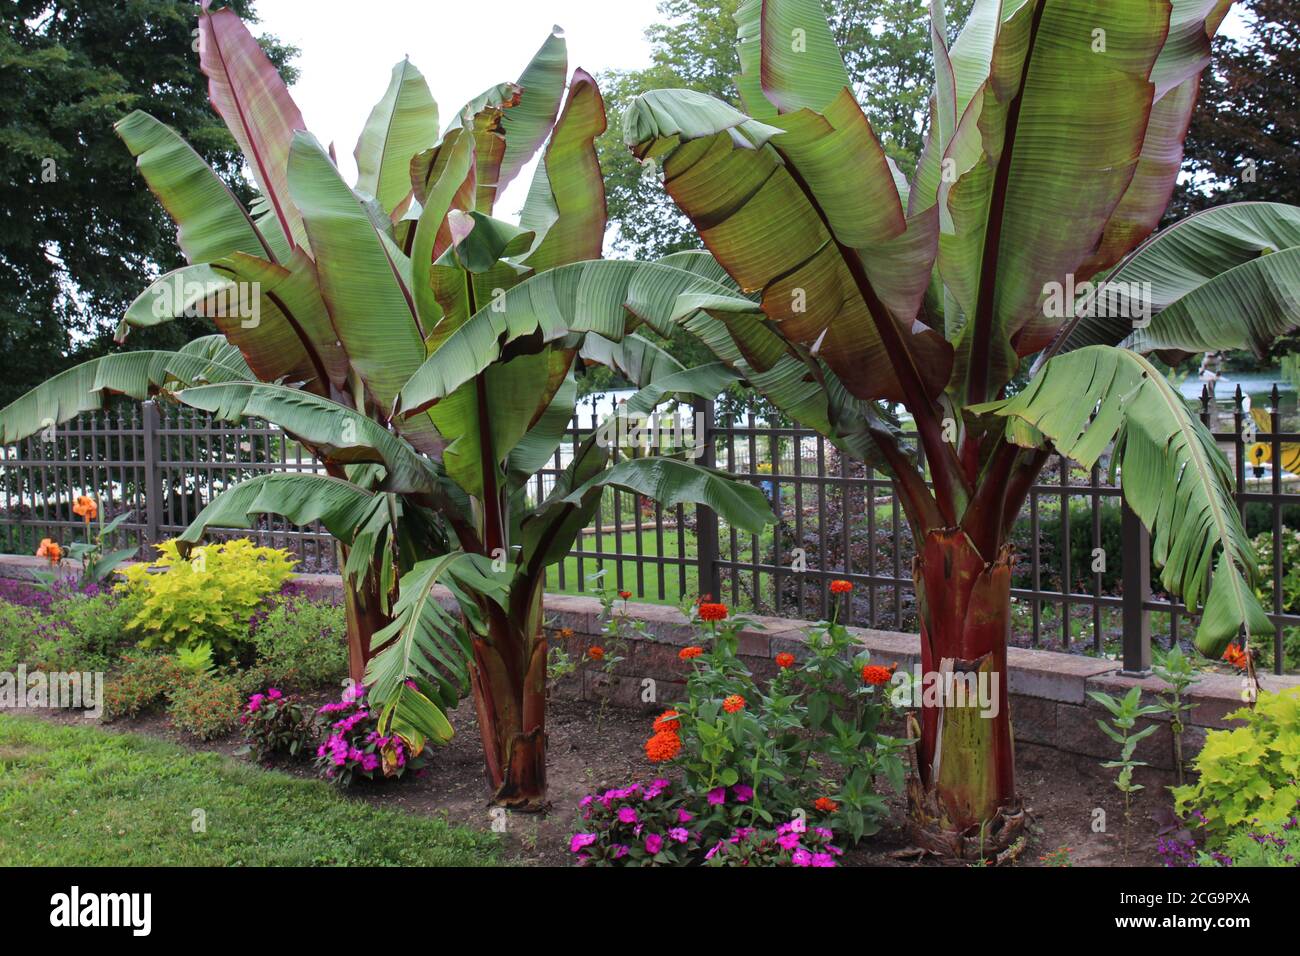 Three Red Leaf Abyssinian Banana trees, orange Zinnias, pink Impatiens and light green Coleus planted along the edge of a brick and metal fence Stock Photo